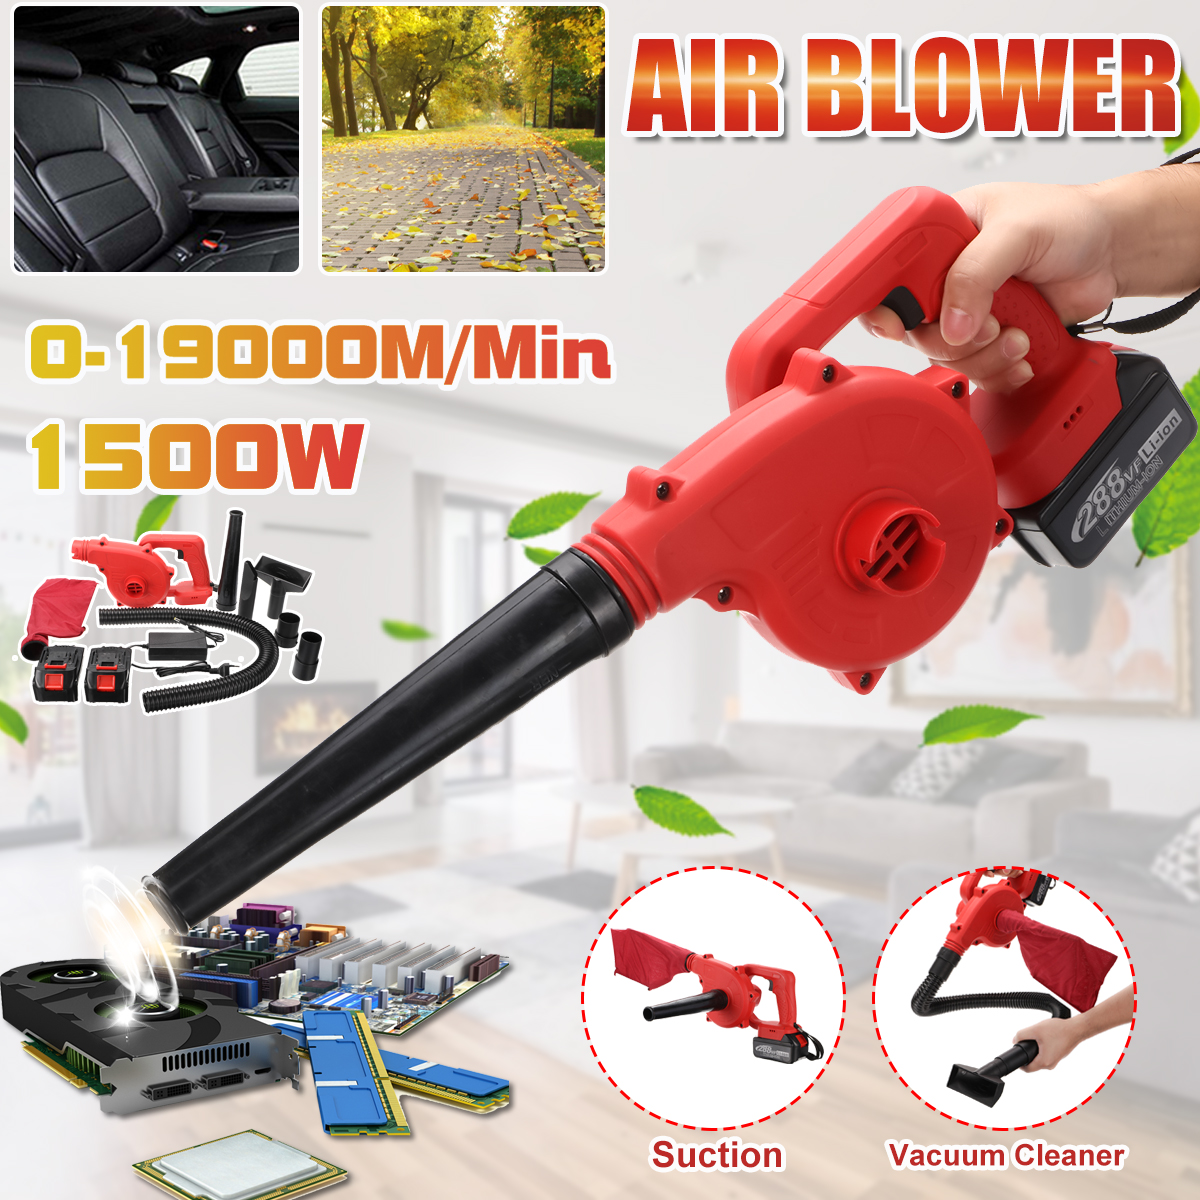 288VF-2-IN-1-Electric-Air-Blower-Kit-Cleaner-Wireless-Air-Fan-Dust-Blowing-Computer-Dust-Collector-A-1855797-1